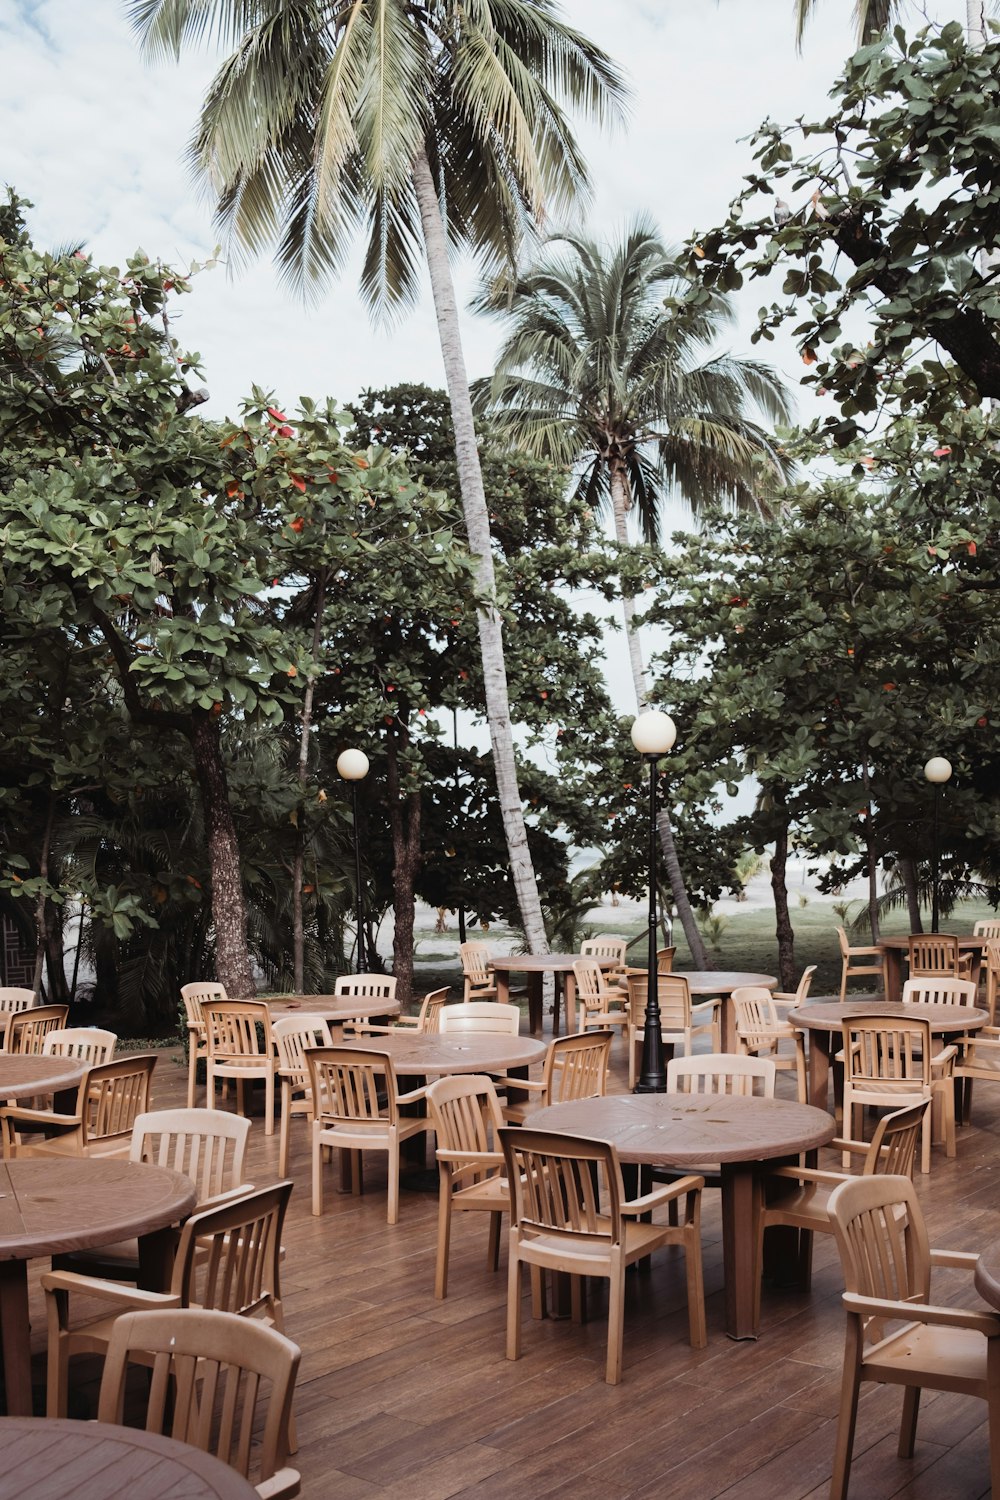 a wooden deck with tables and chairs and a palm tree